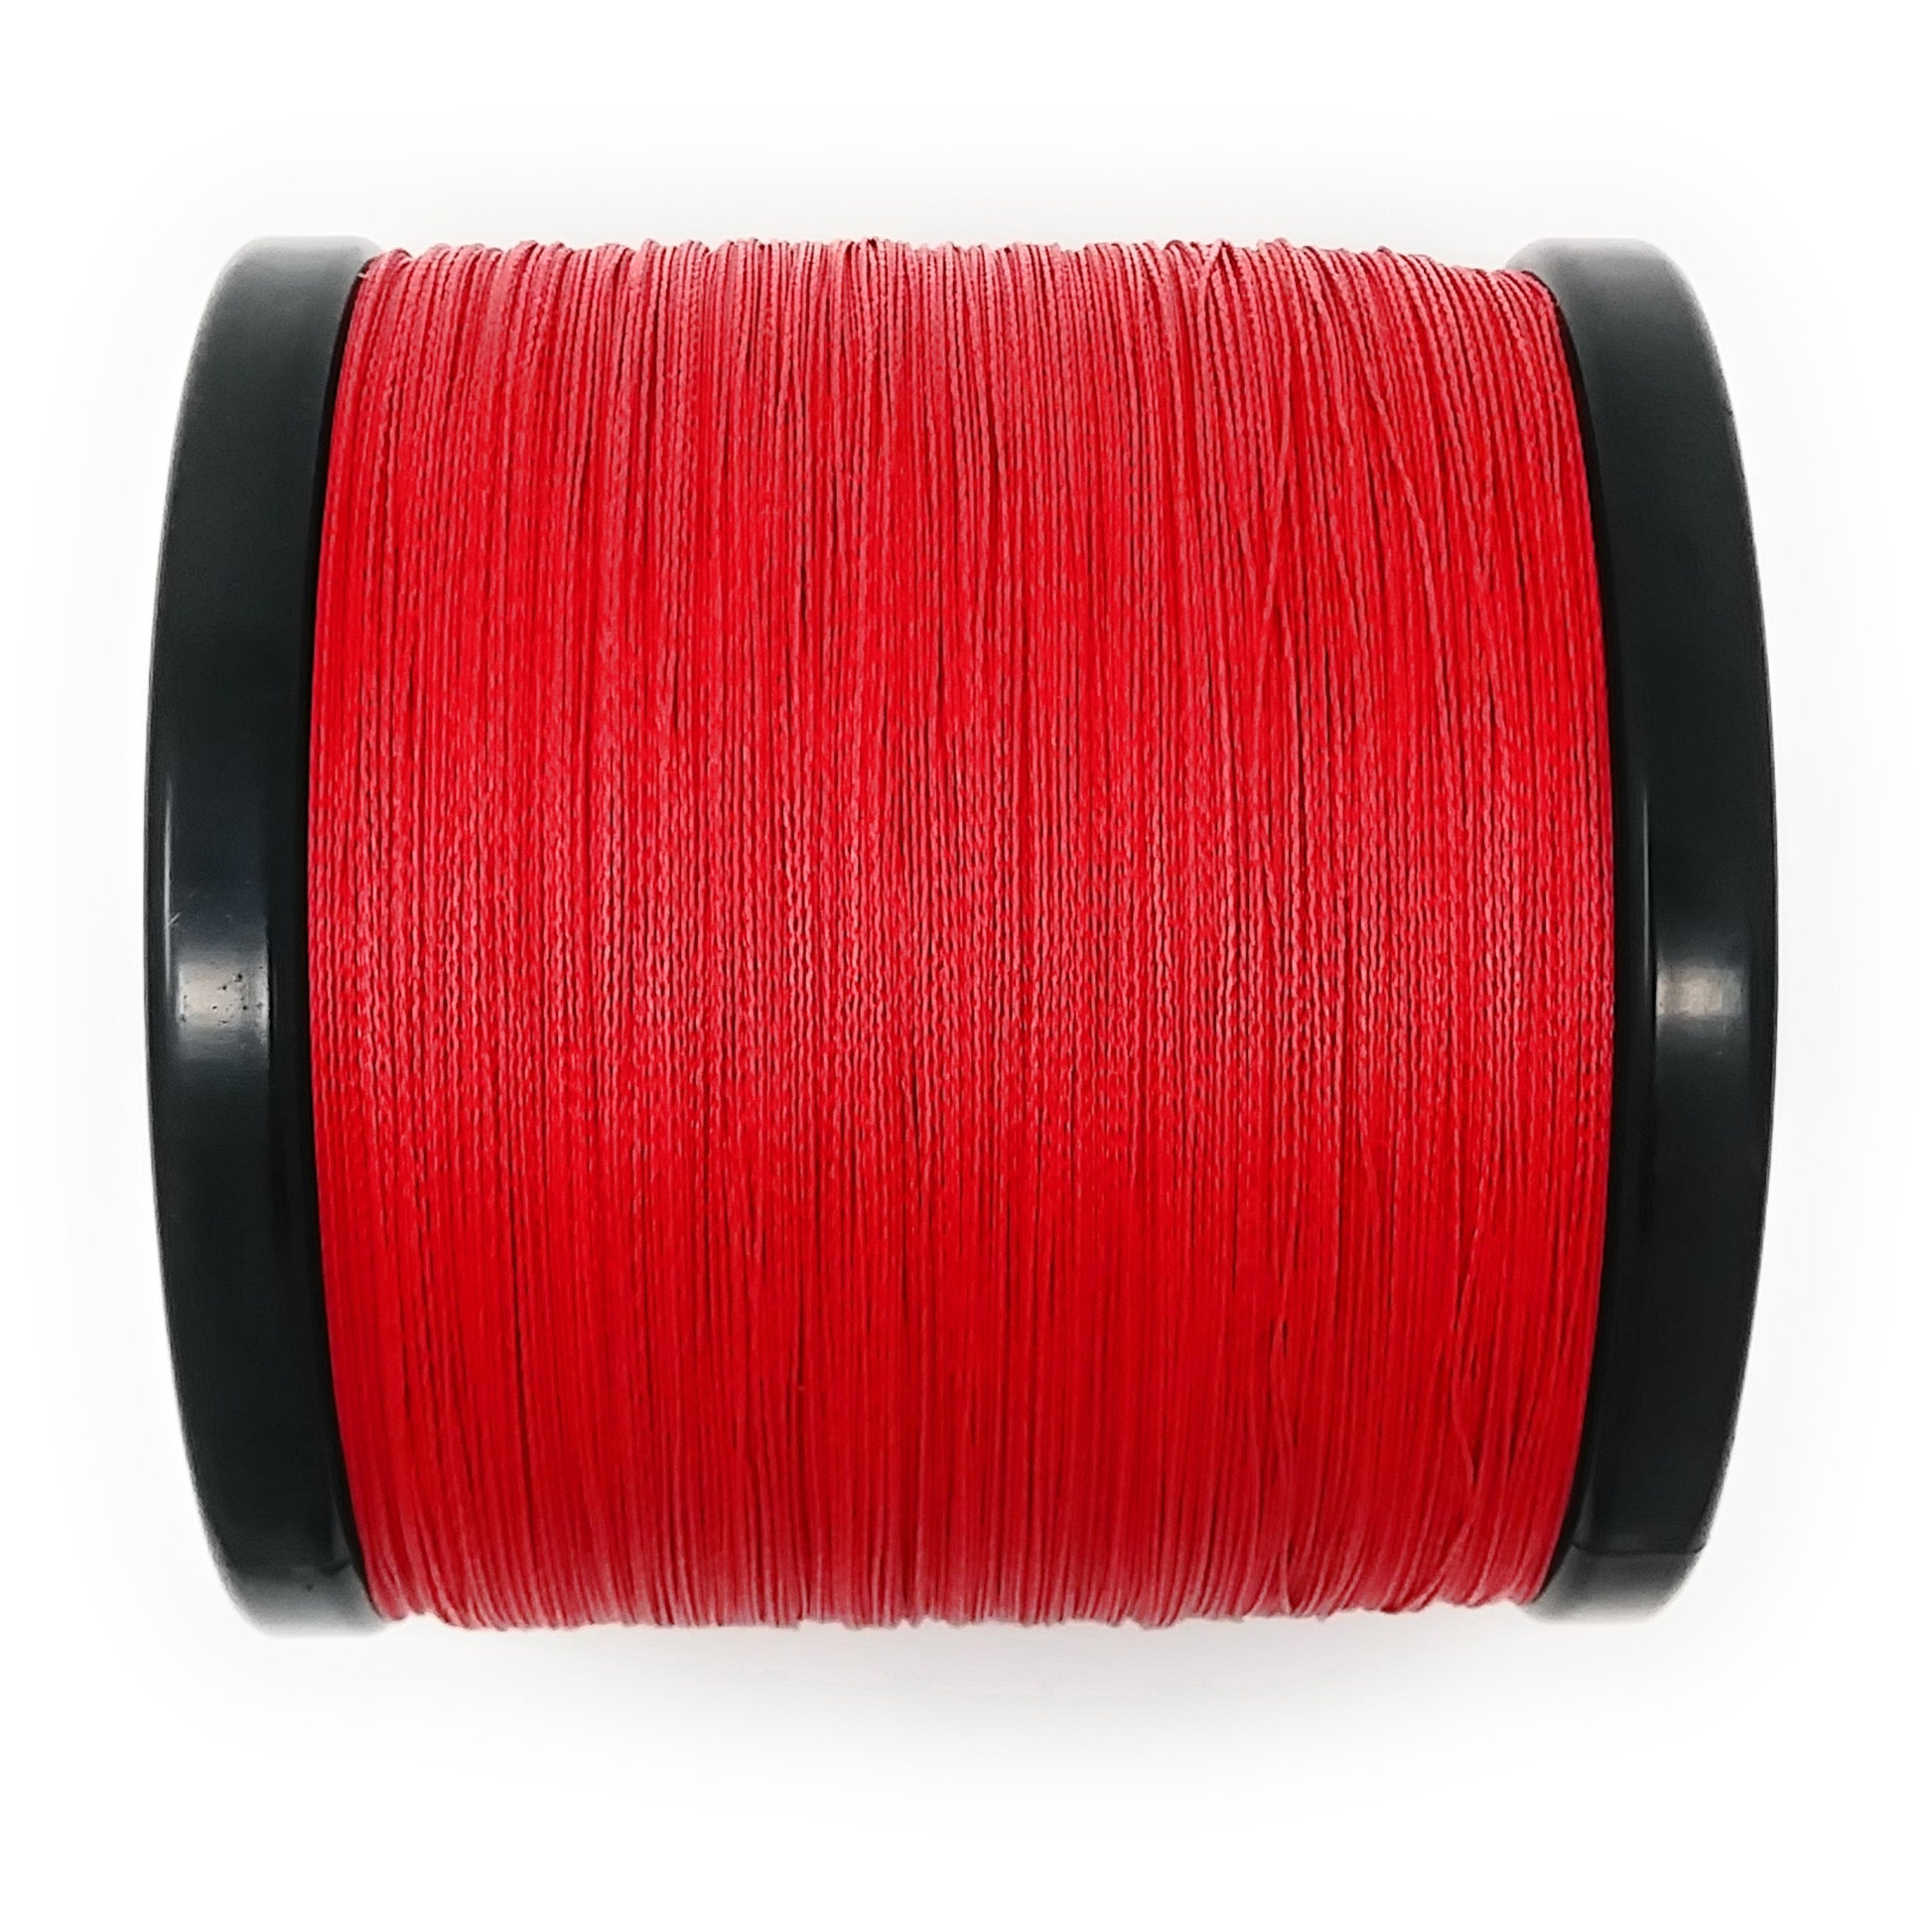 Reaction Tackle No Fade Red 10lb 1500yd, Size: 10 lbs